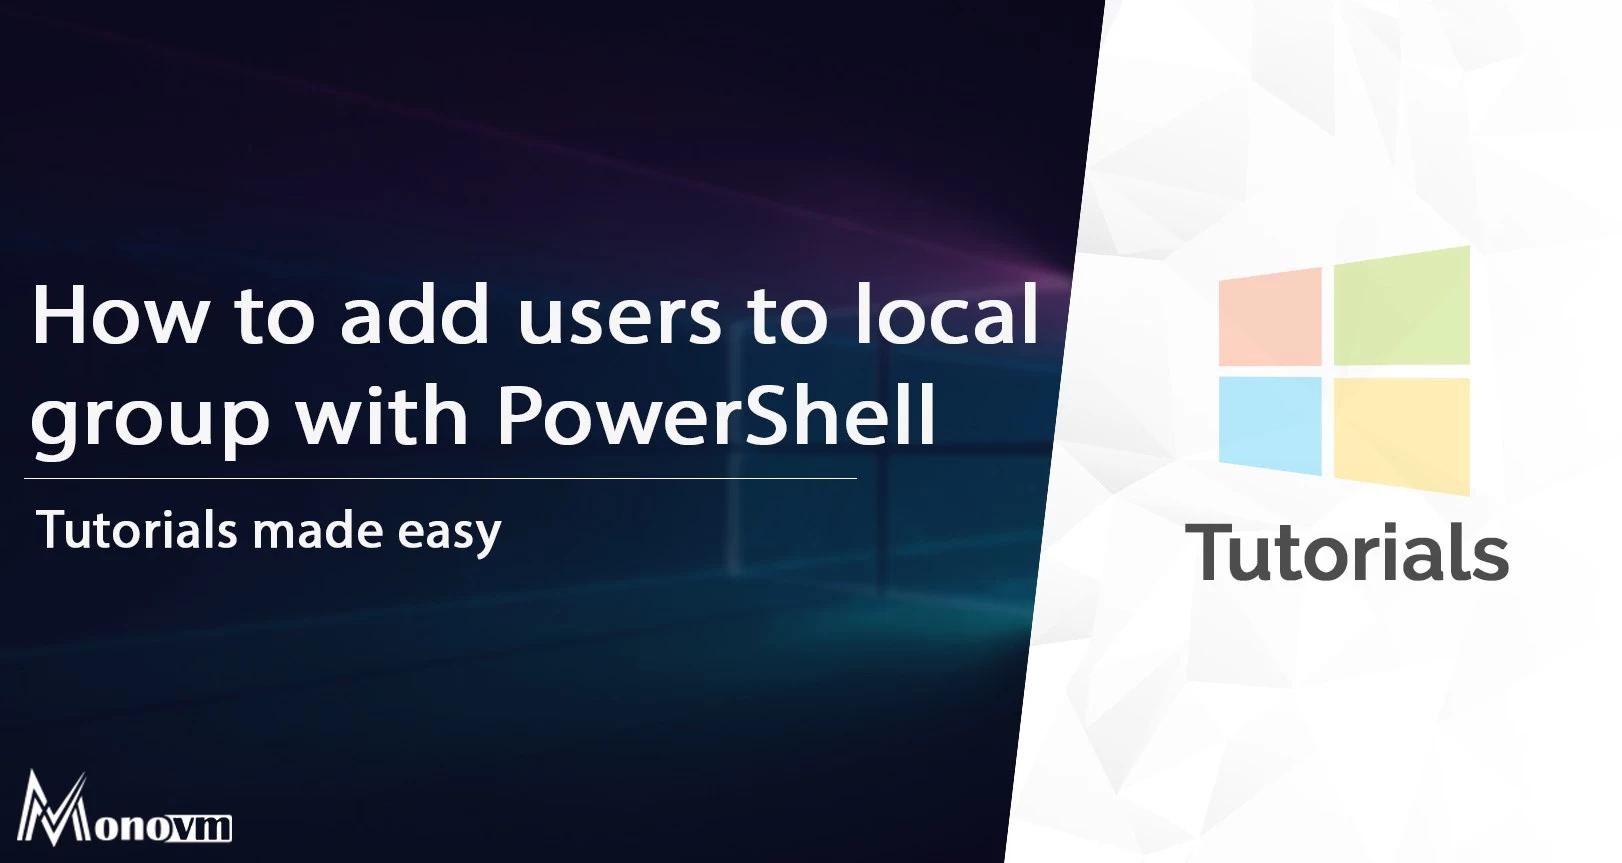 Add Users to Local Group with PowerShell